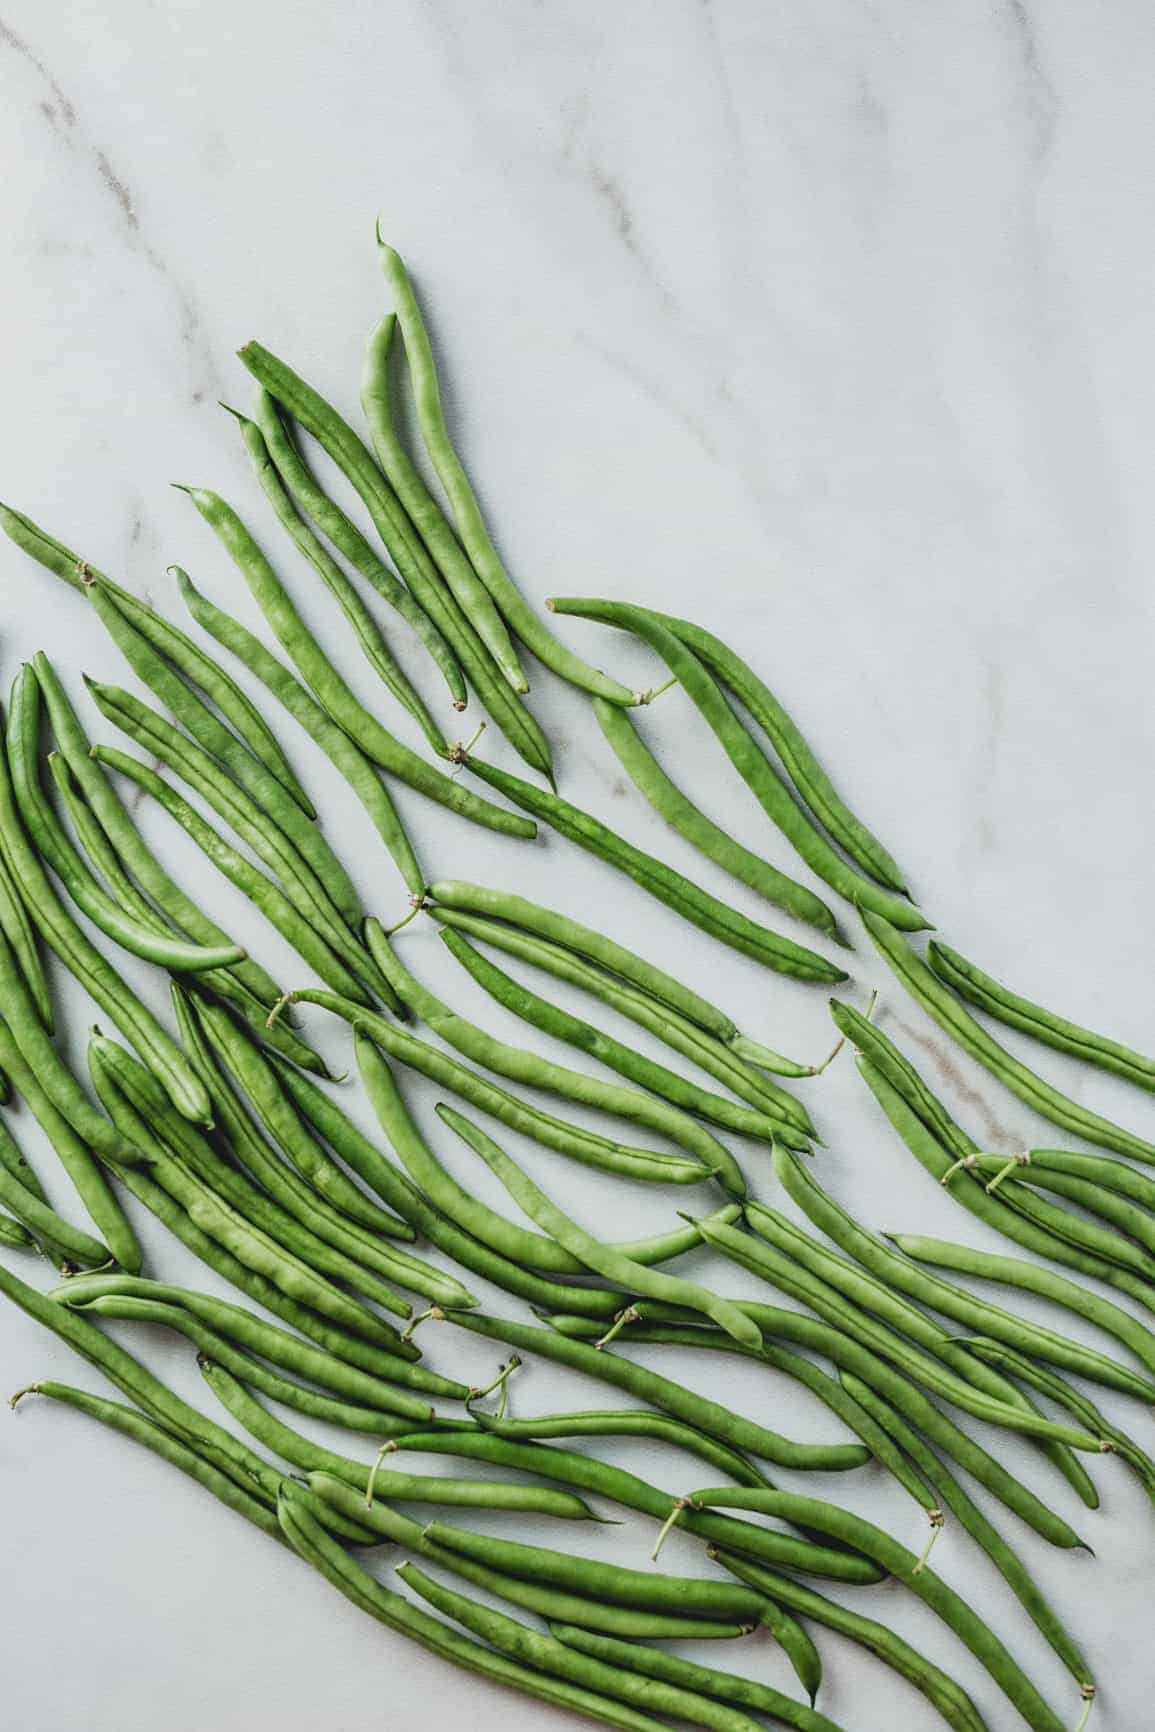 Green beans on a marble background